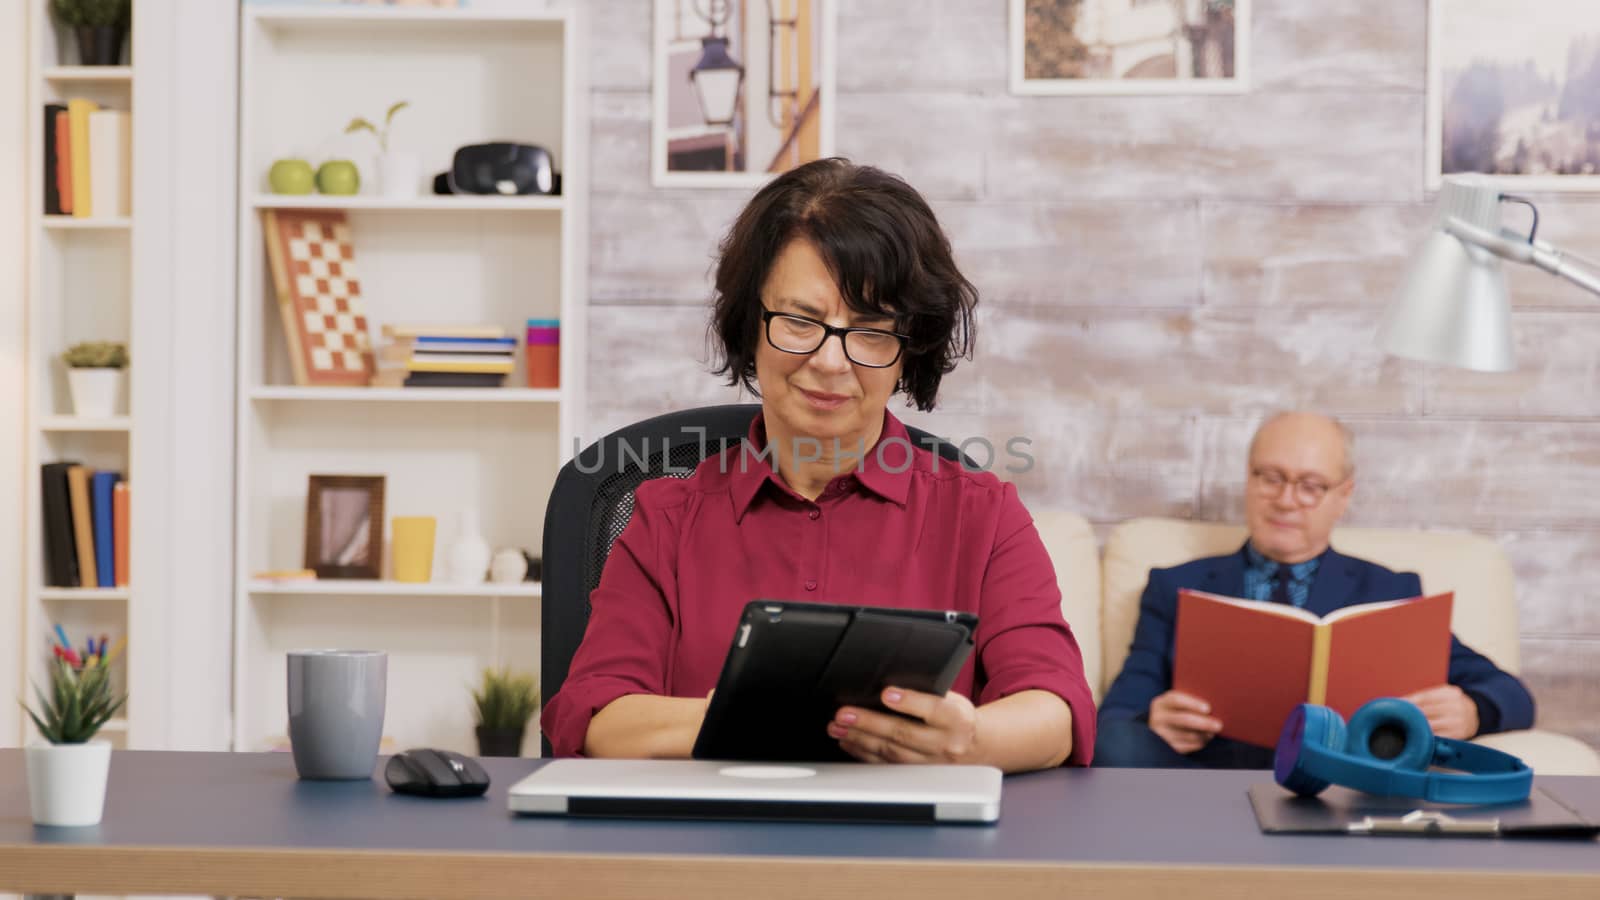 Elderly woman with glasses using tablet in living room. Elederly man sitting on sofa and reading a book in the background.